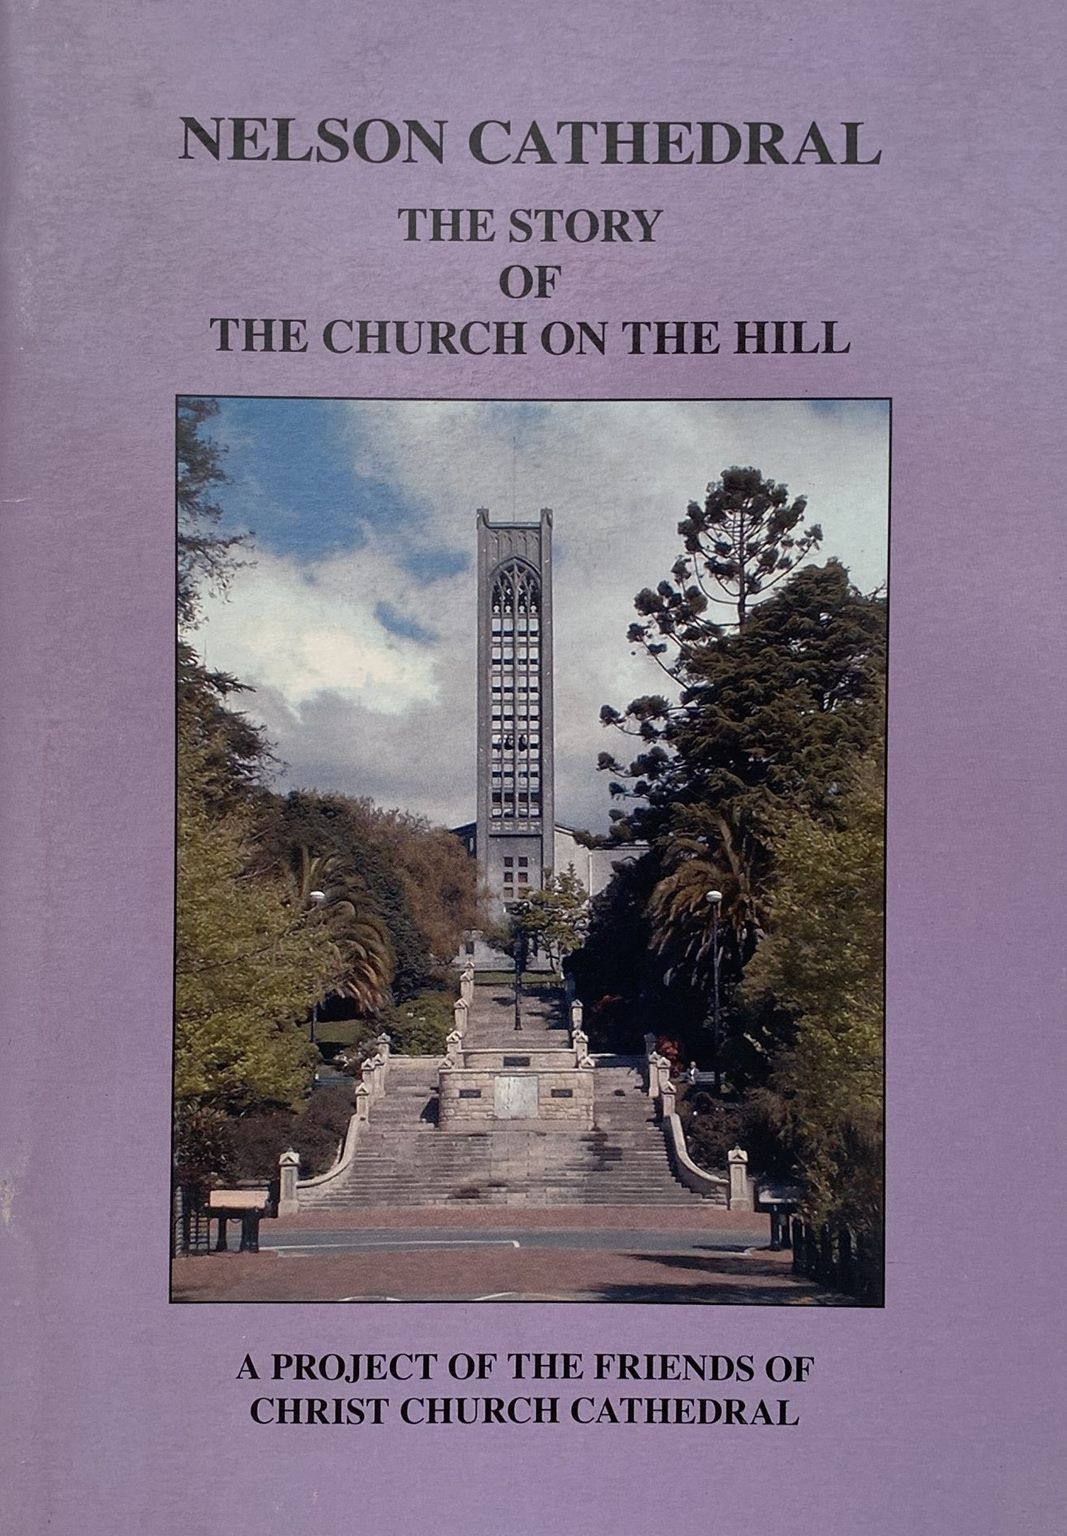 NELSON CATHEDRAL: The Story of the Church on the Hill